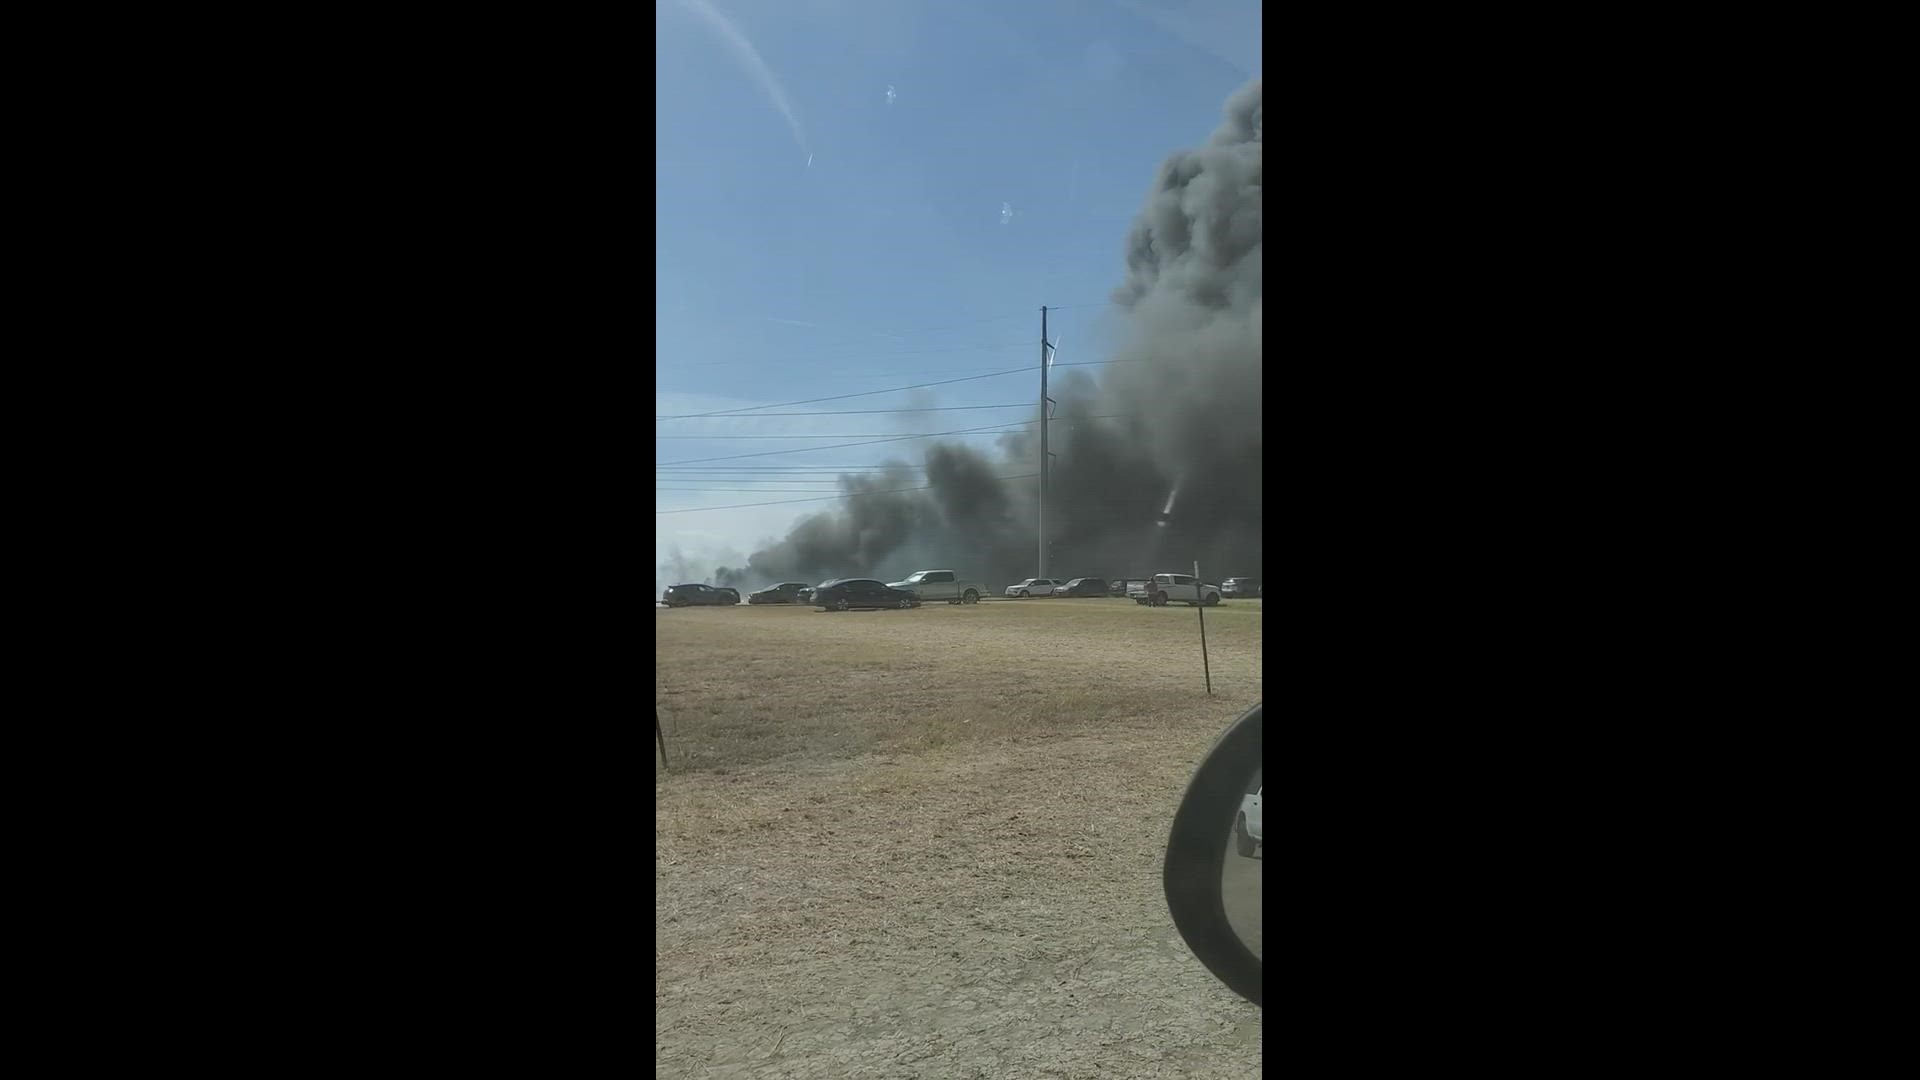 The Robinson Family Farm in Temple has reported that a fire in their parking lot has closed down operations for Saturday, according to their Facebook page.